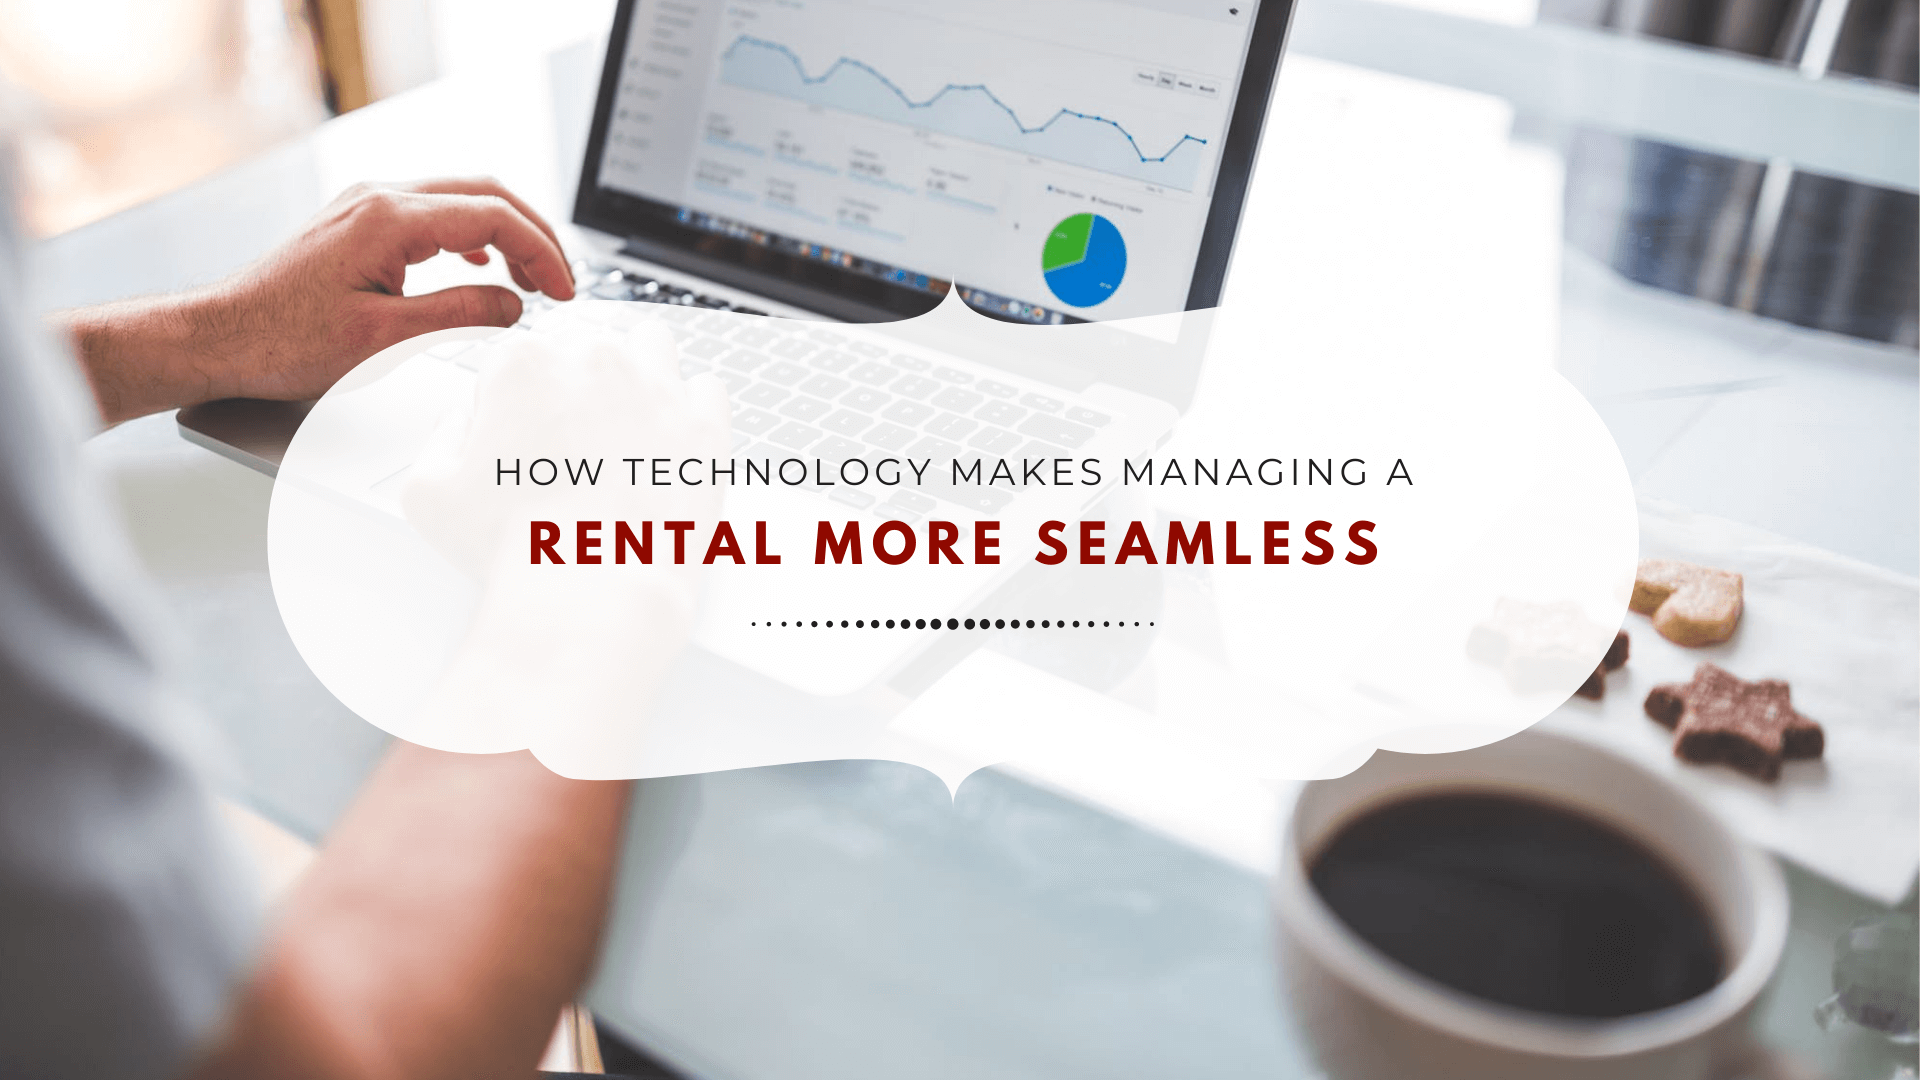 How Technology Makes Managing a Rental Property More Seamless | Indianapolis Property Management